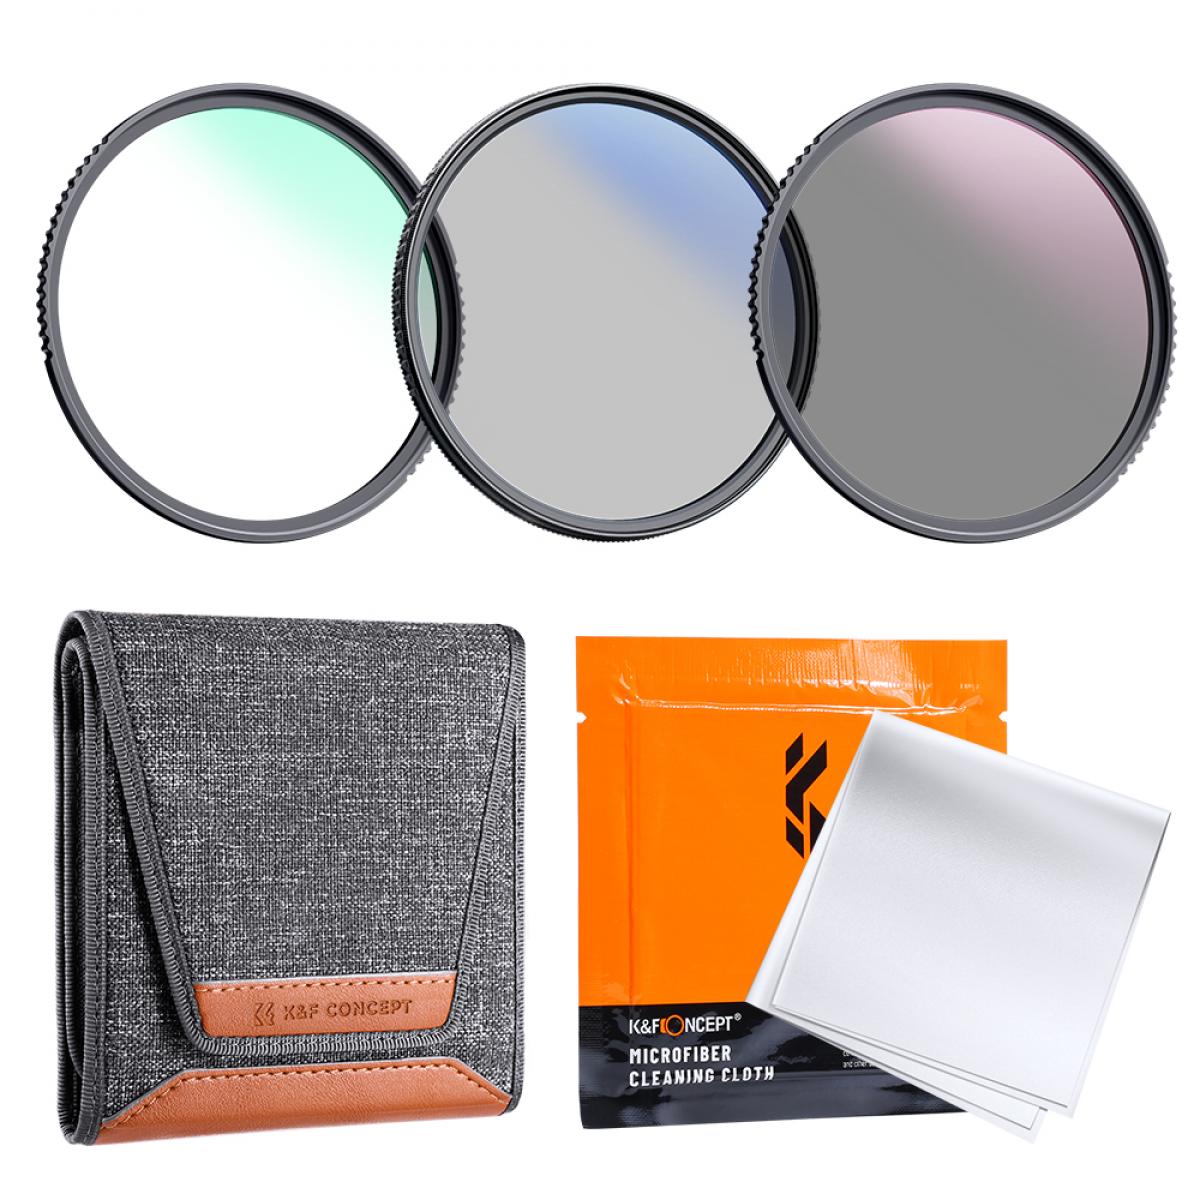 72mm MCUV+CPL+ND4 Lens Filter Kit with Lens Cleaning Cloth and Filter Bag